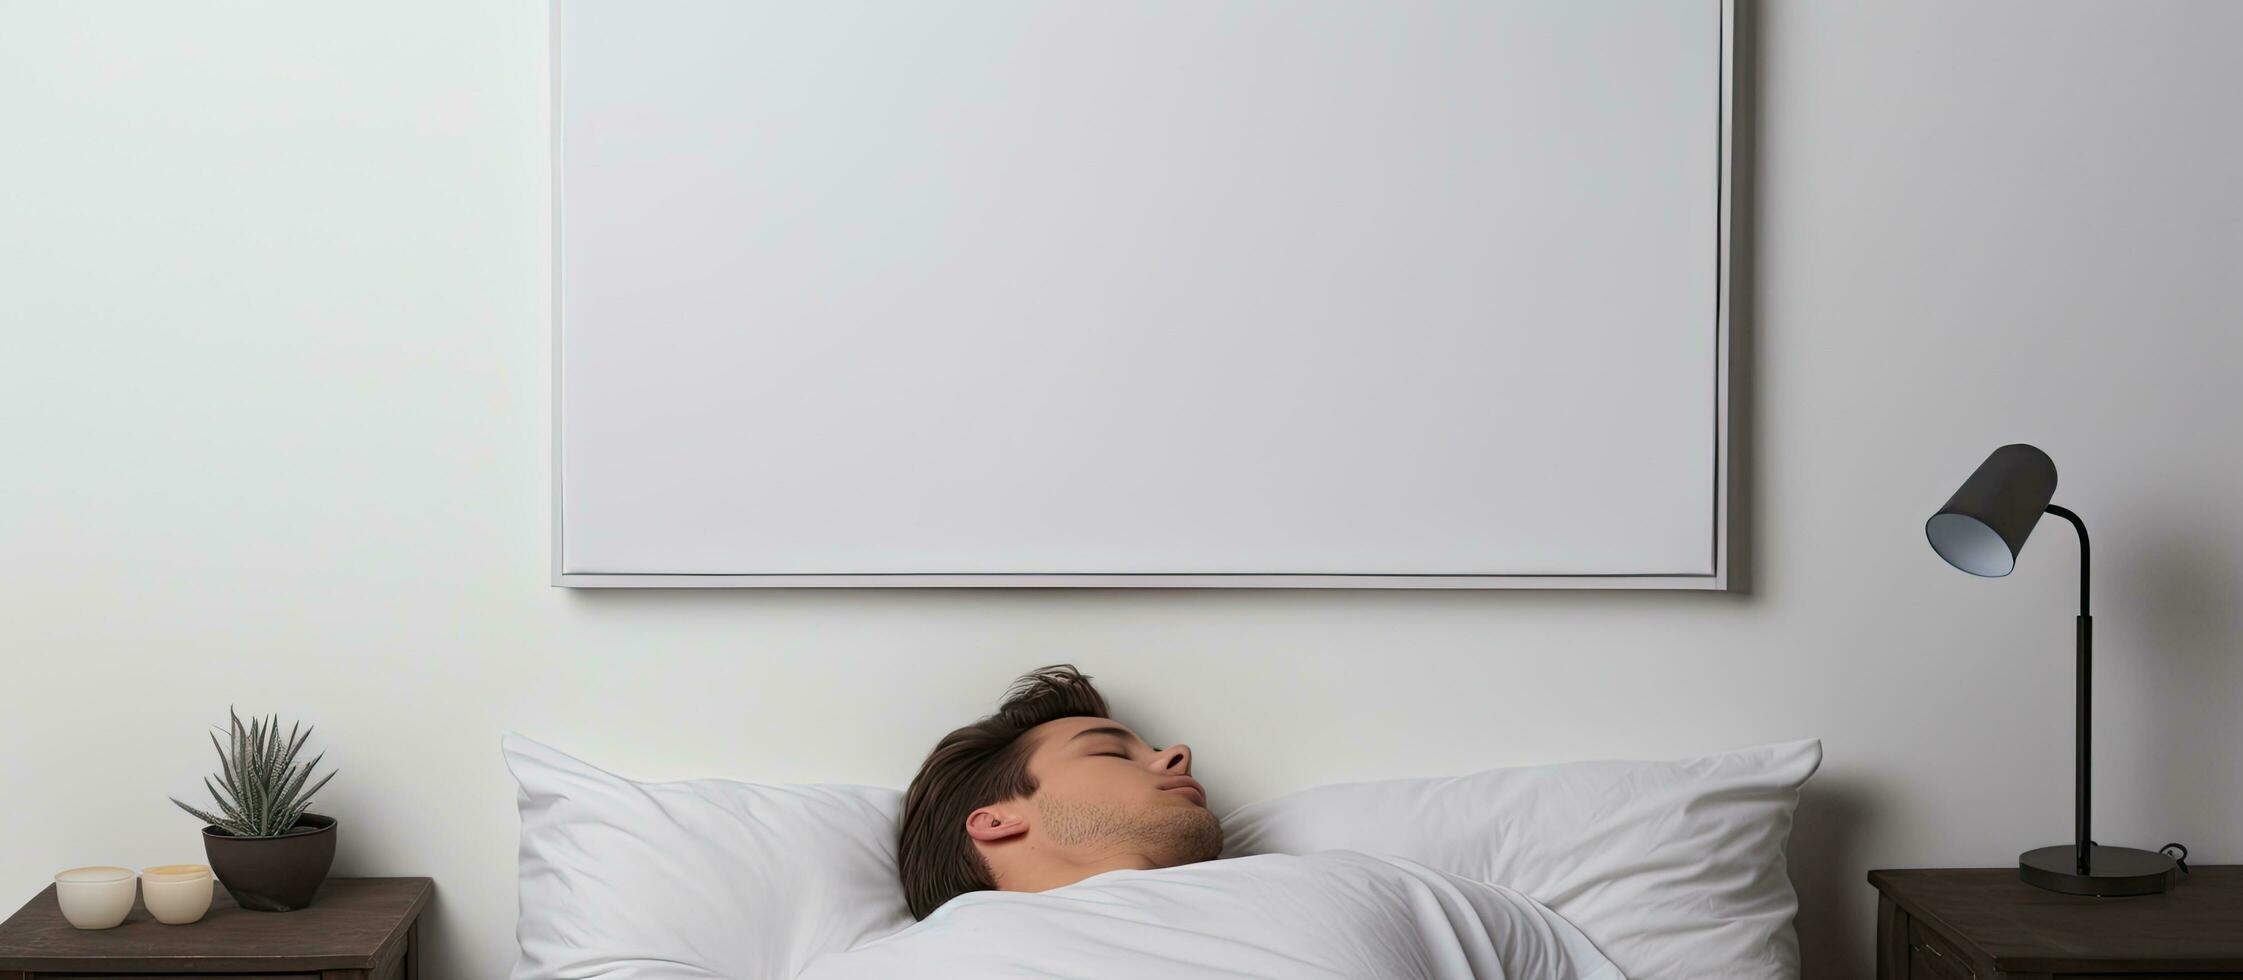 Photo of a man resting peacefully in bed under a soft white blanket with copy space